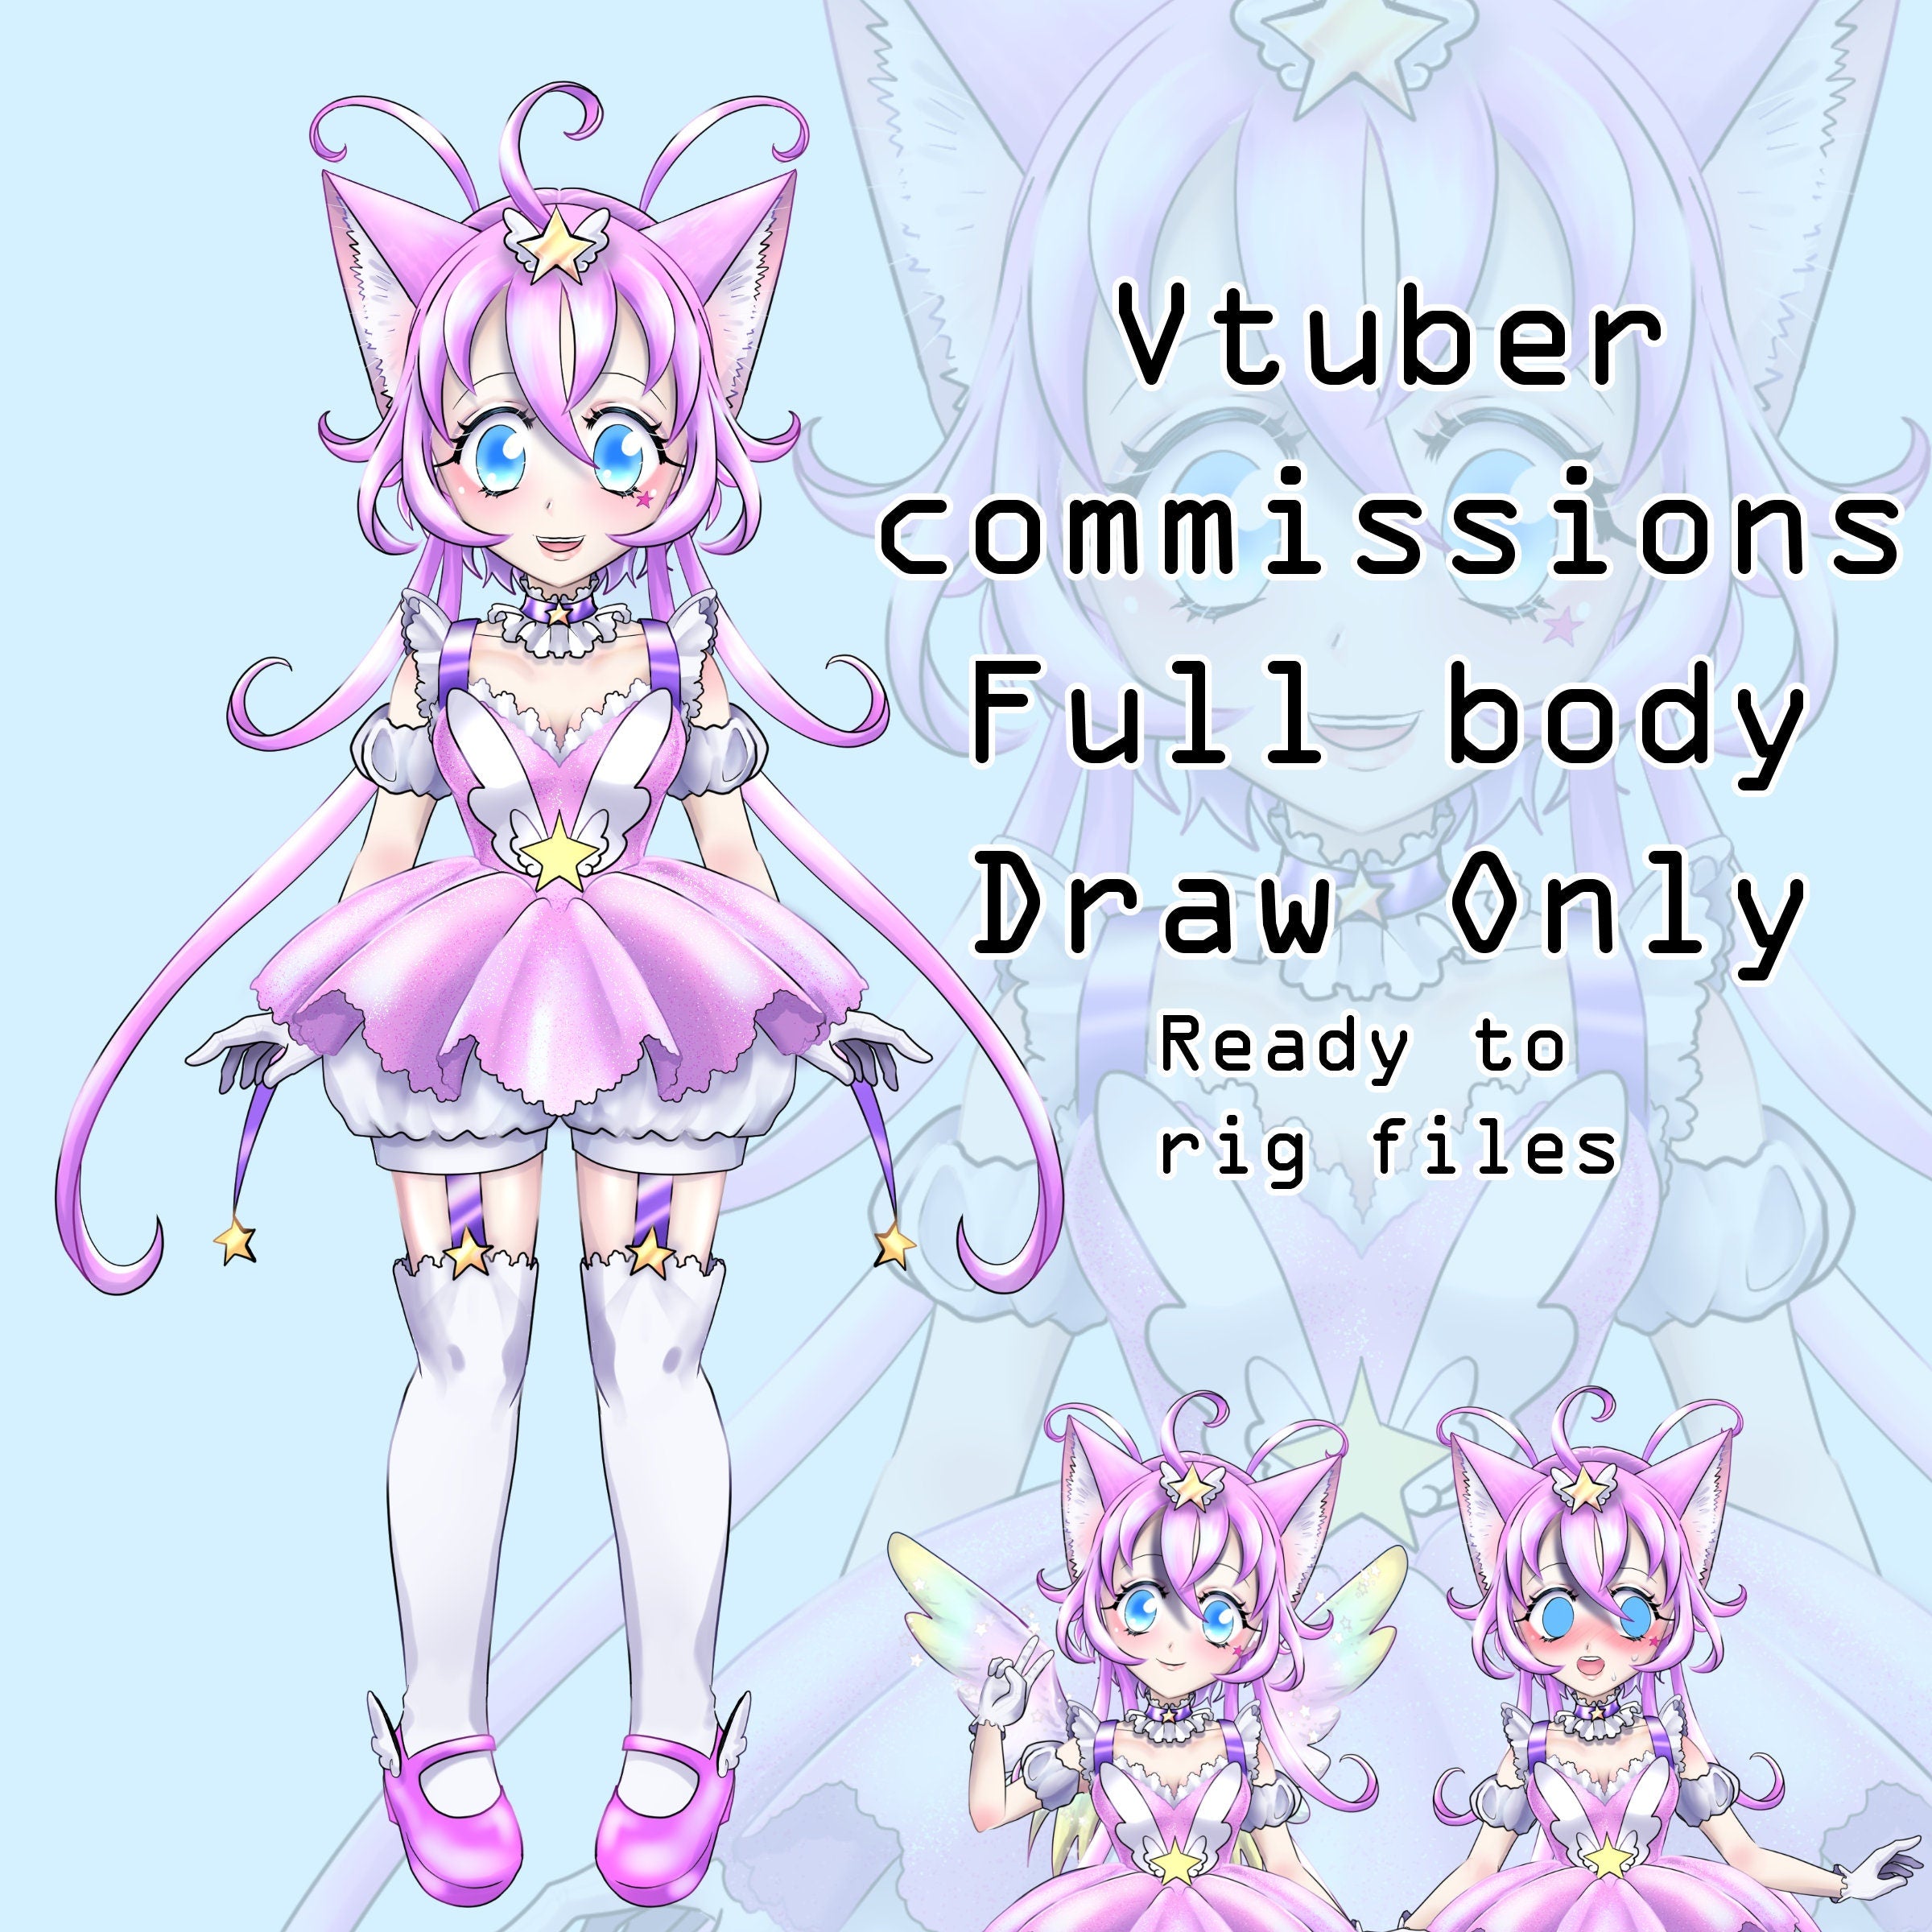 VTuber model LIVE2D commission Full body Drawing Art only ready to rig in LIVE 2D custom made anime avatar for gaming / streaming